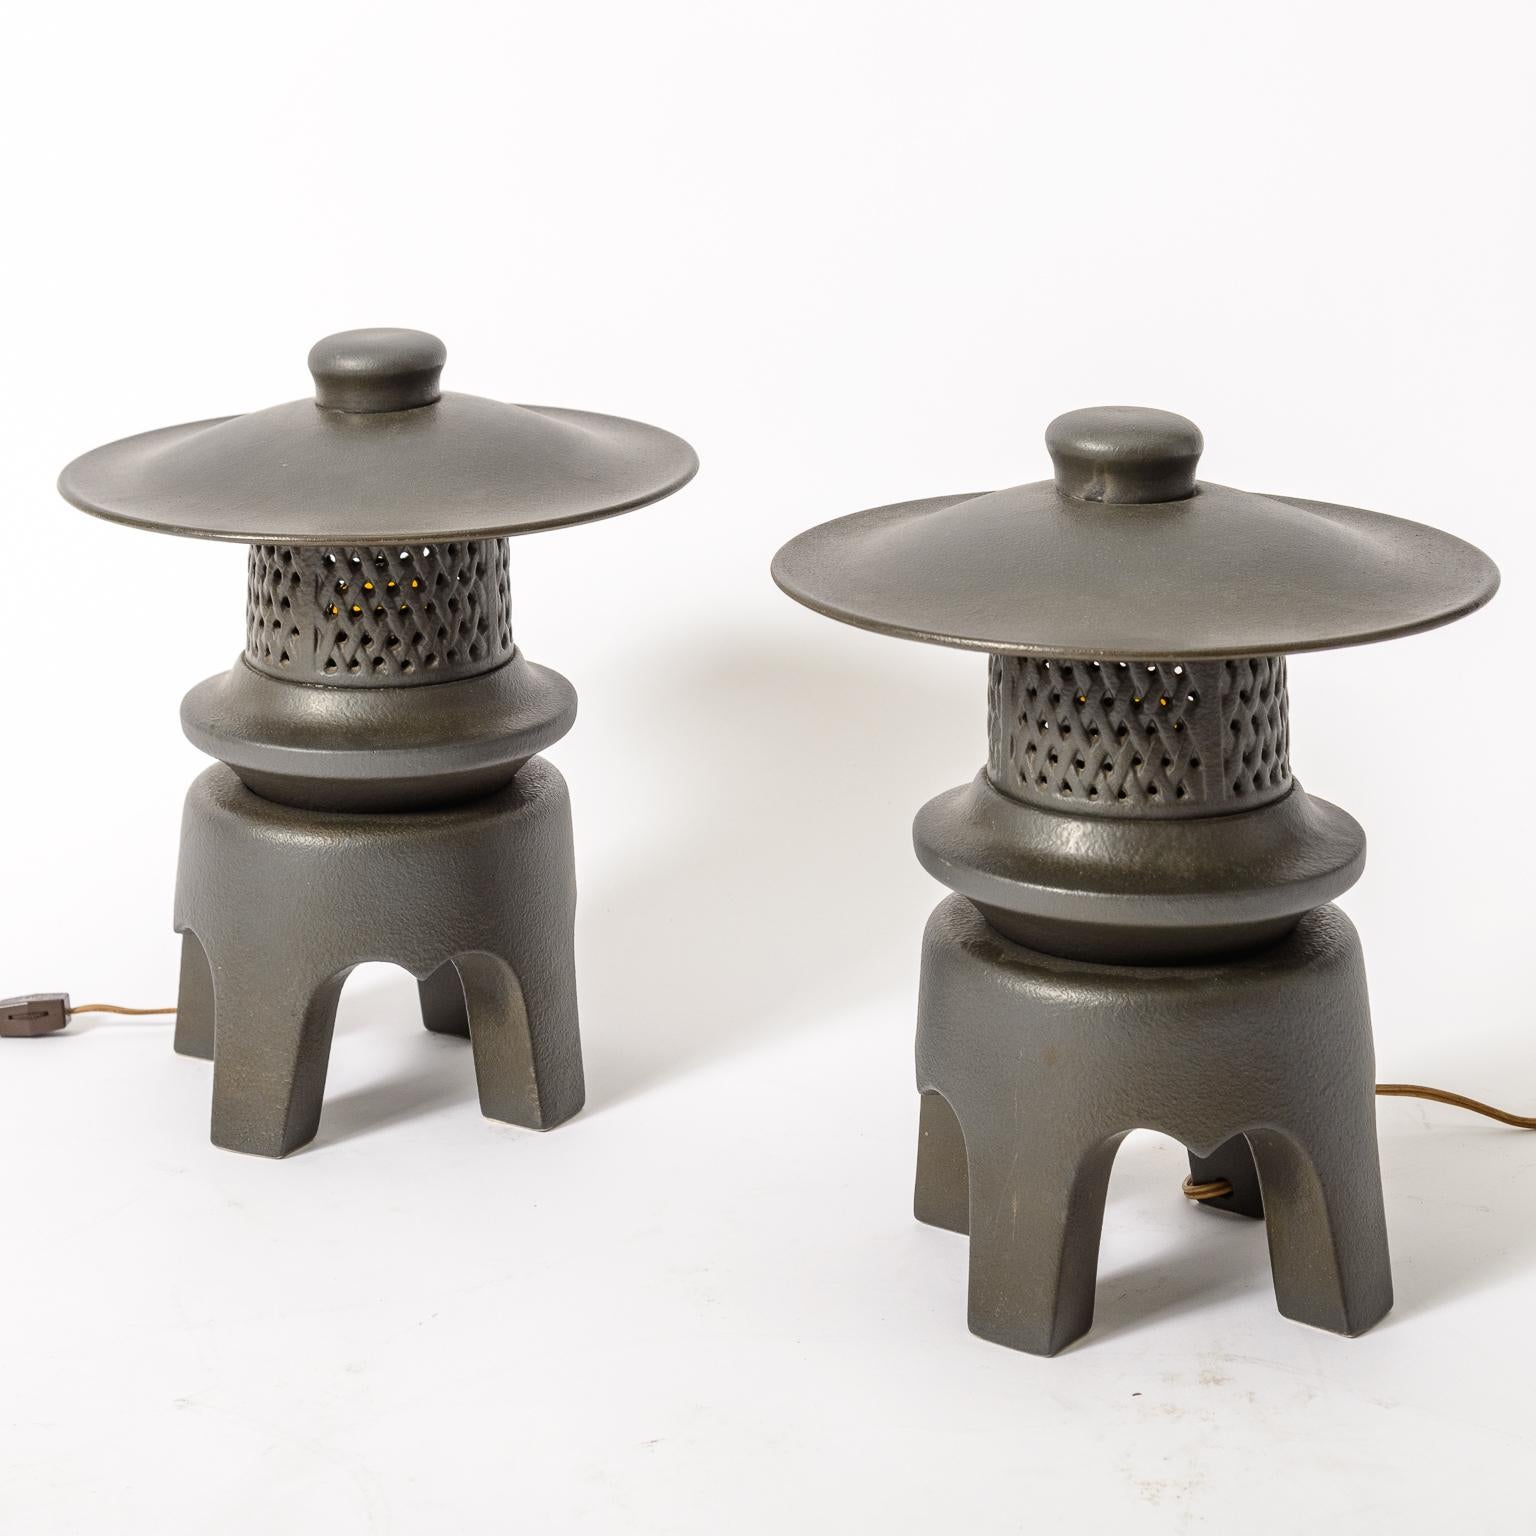 A pair of Midcentury Ceramic Pagoda Lamps
Diminutive and Stylish